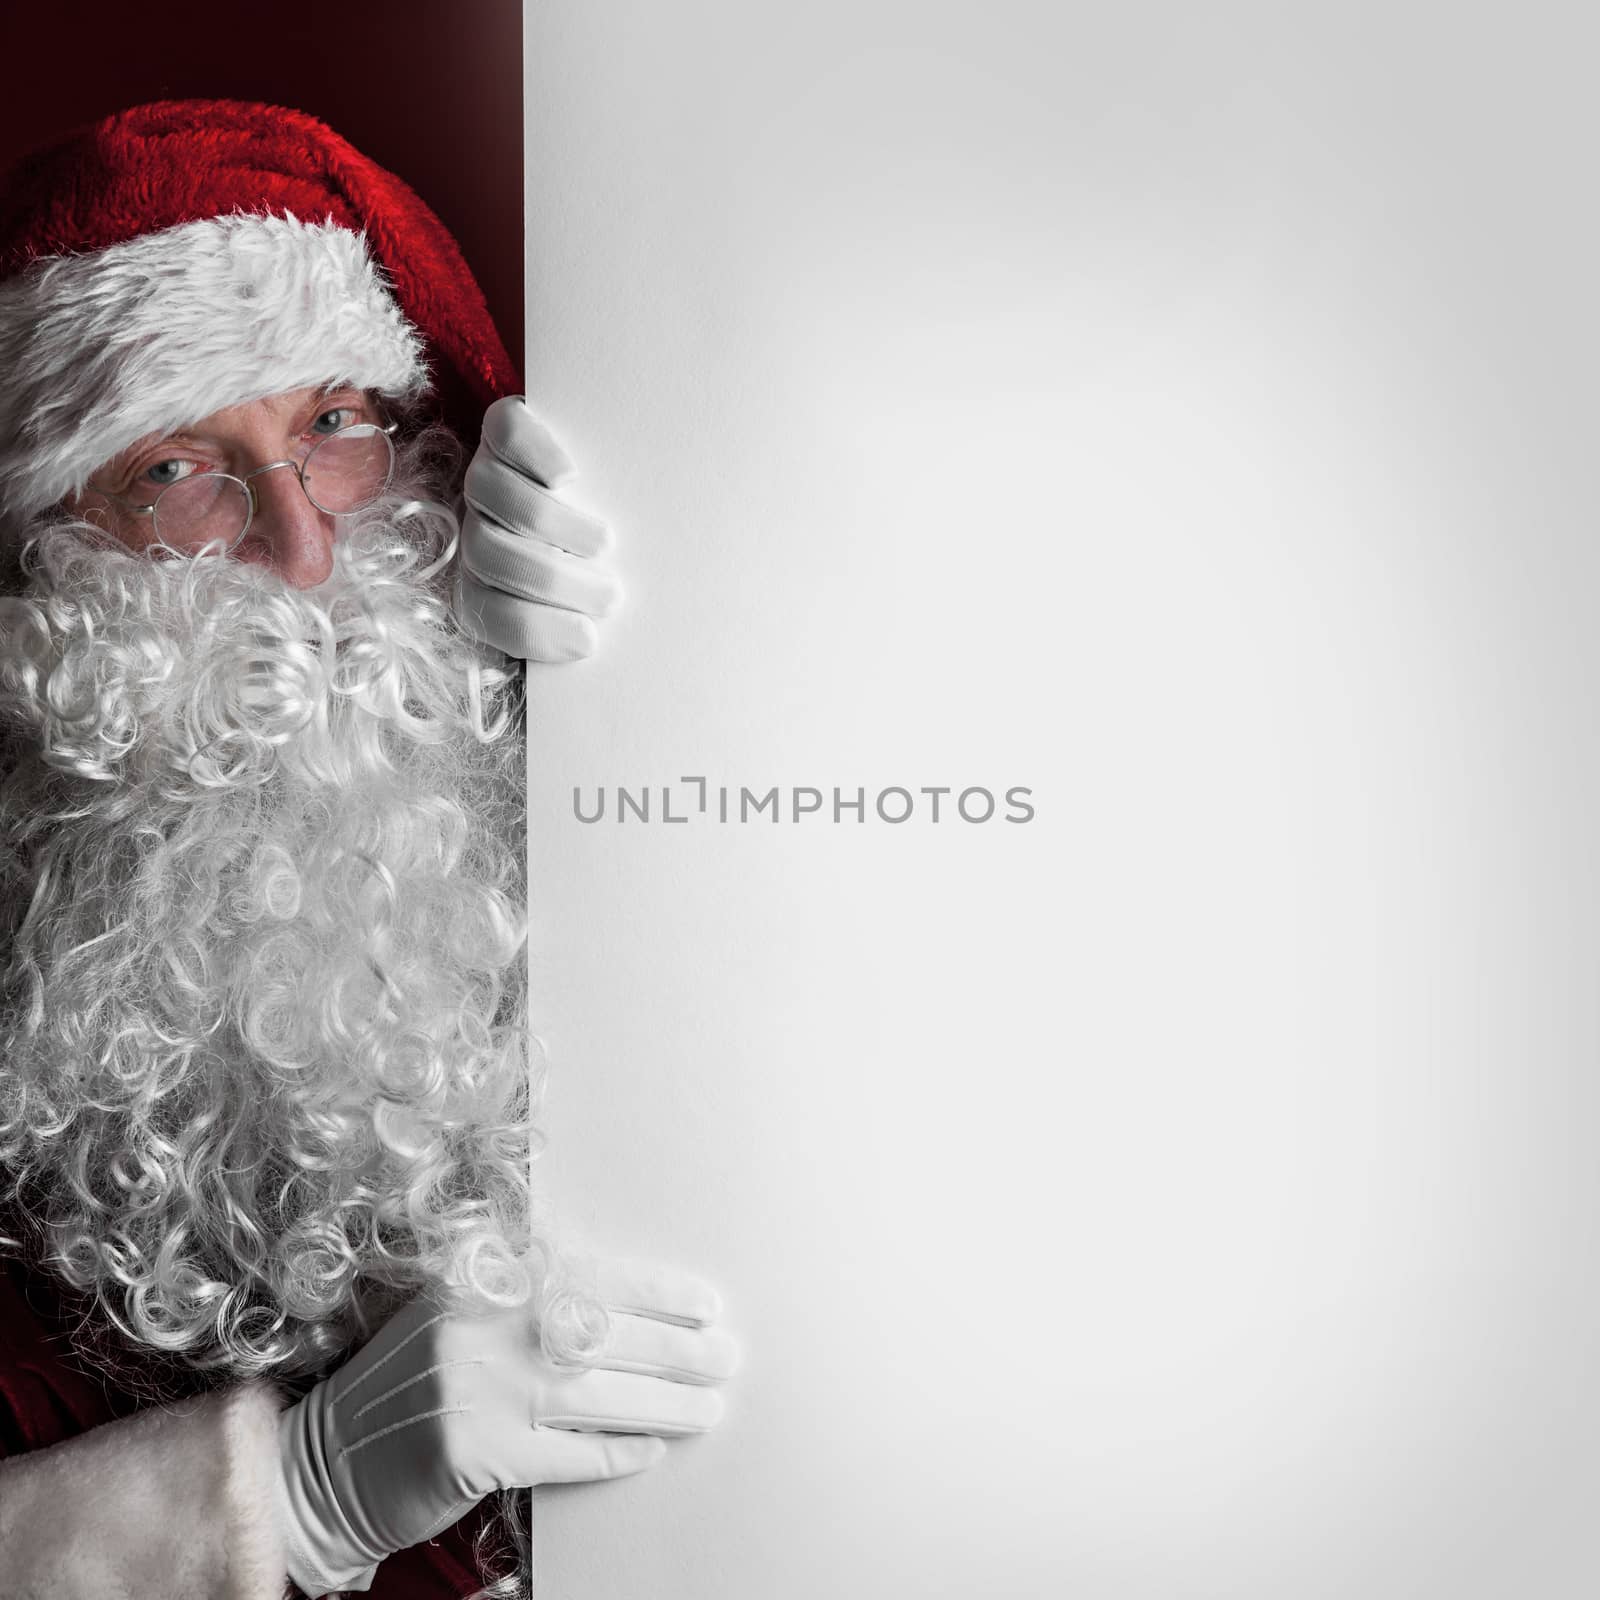 Santa Claus with big blank card by ALotOfPeople